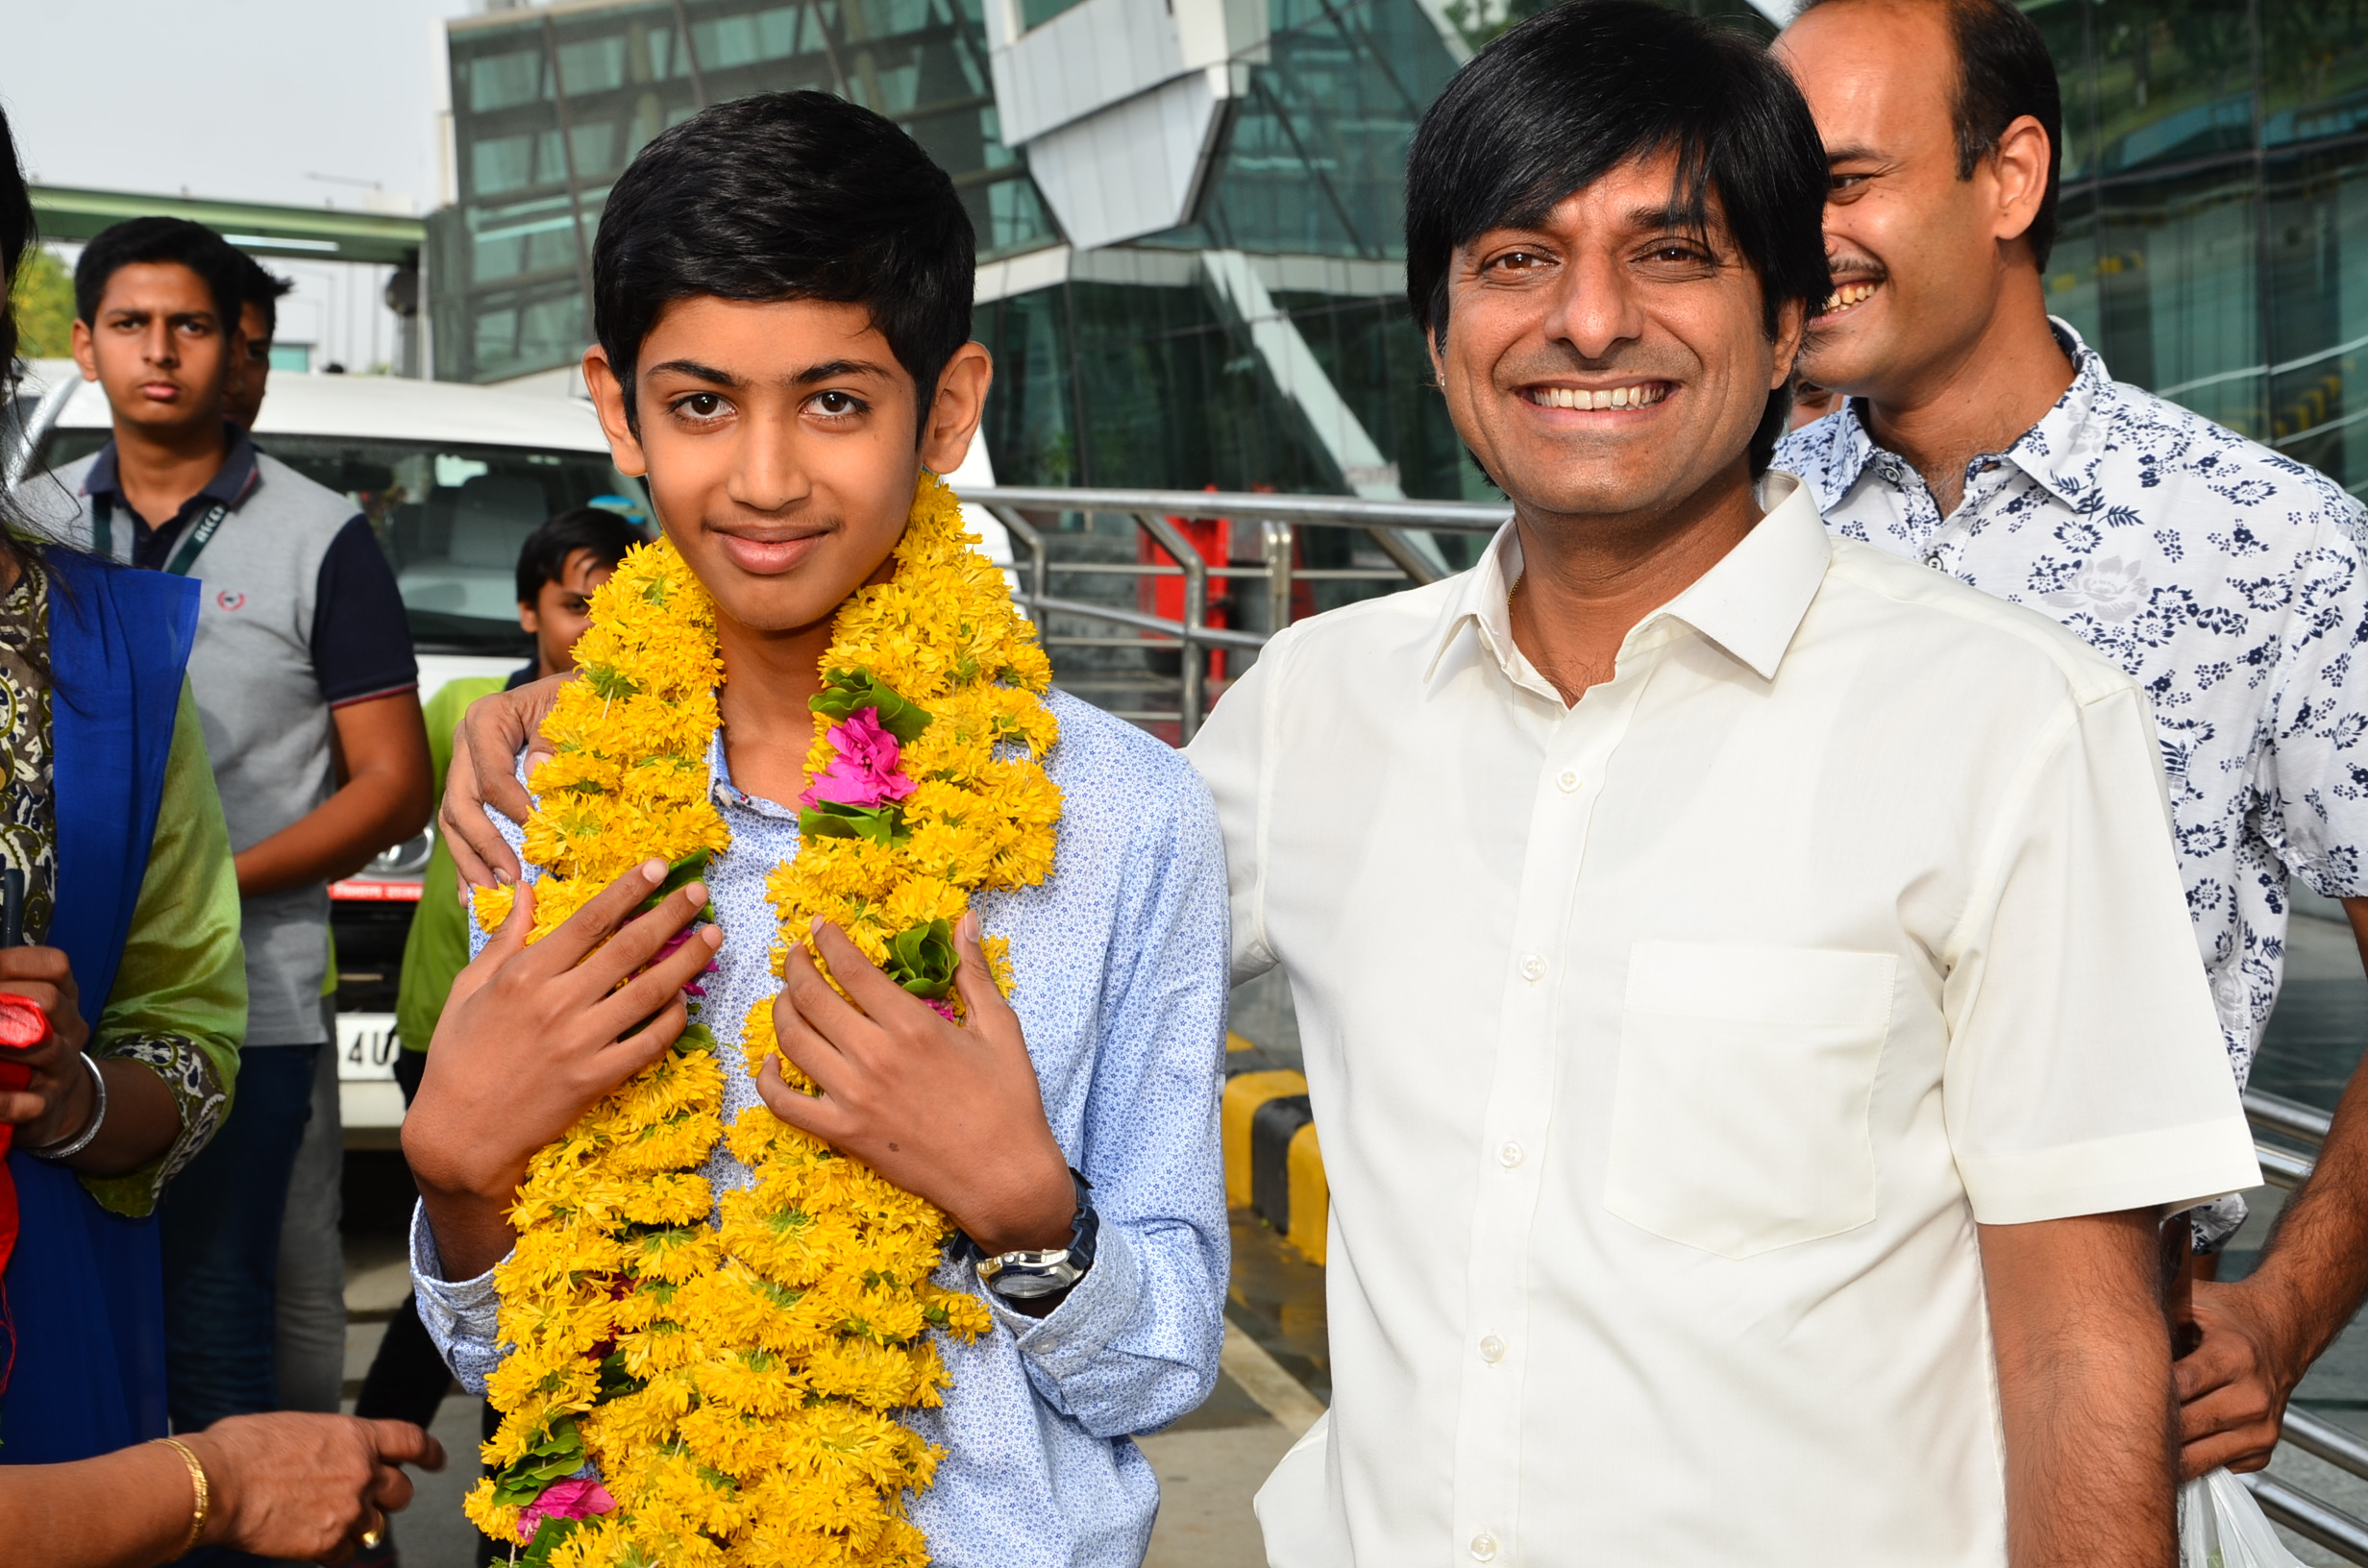 Vaibhav Khater from Udaipur will represent India in Thailand for International Earth Olympiad